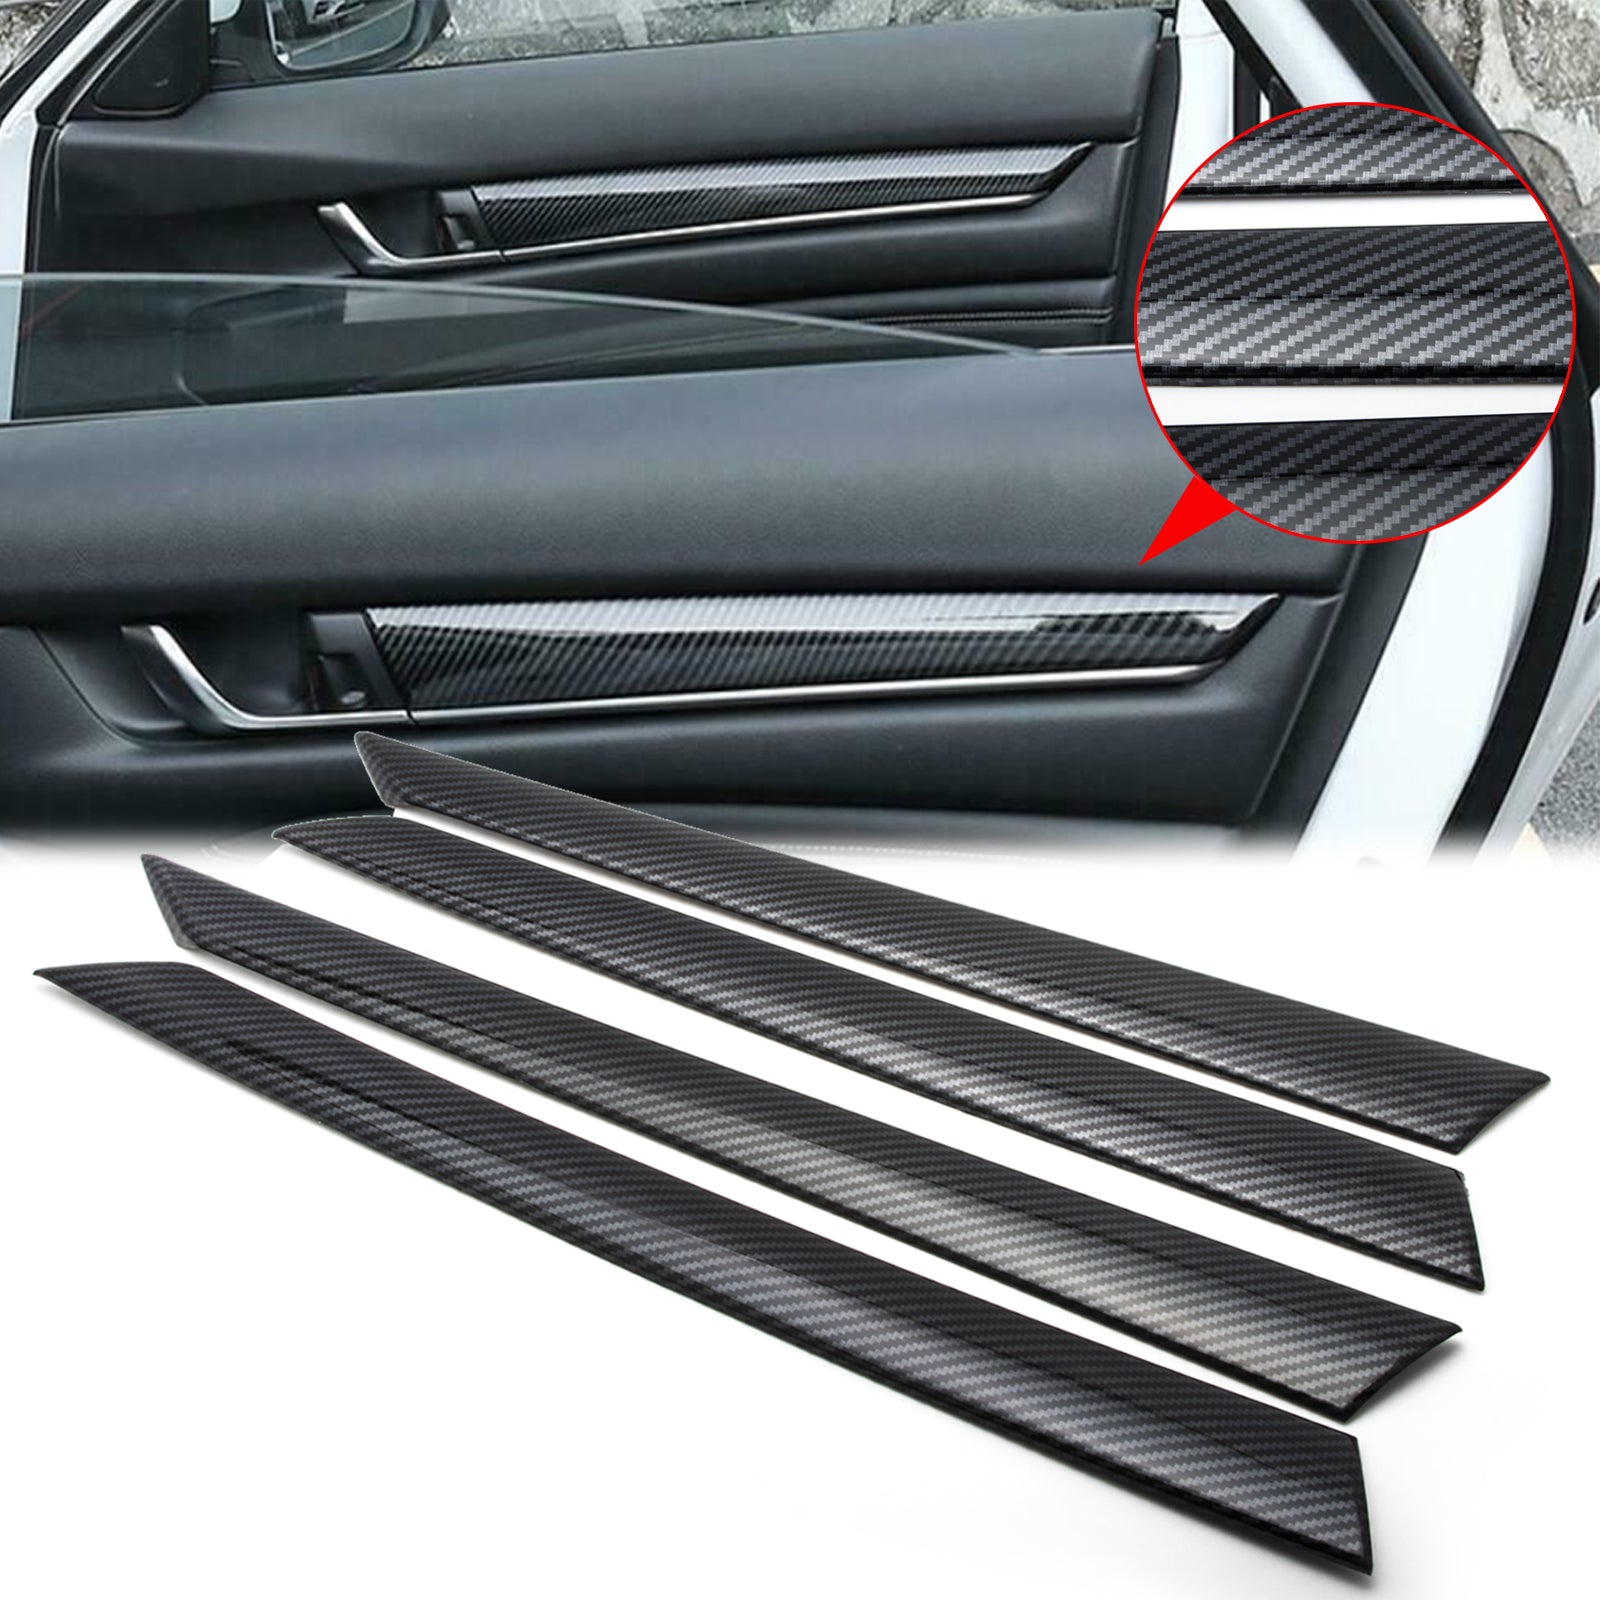 Car Door Molding , Door Cover , Designed for /Y Auto Accessories Interior Modification Styling - Carbon Fiber, Size: 10.2 x 2.4 x 1.4, Gray